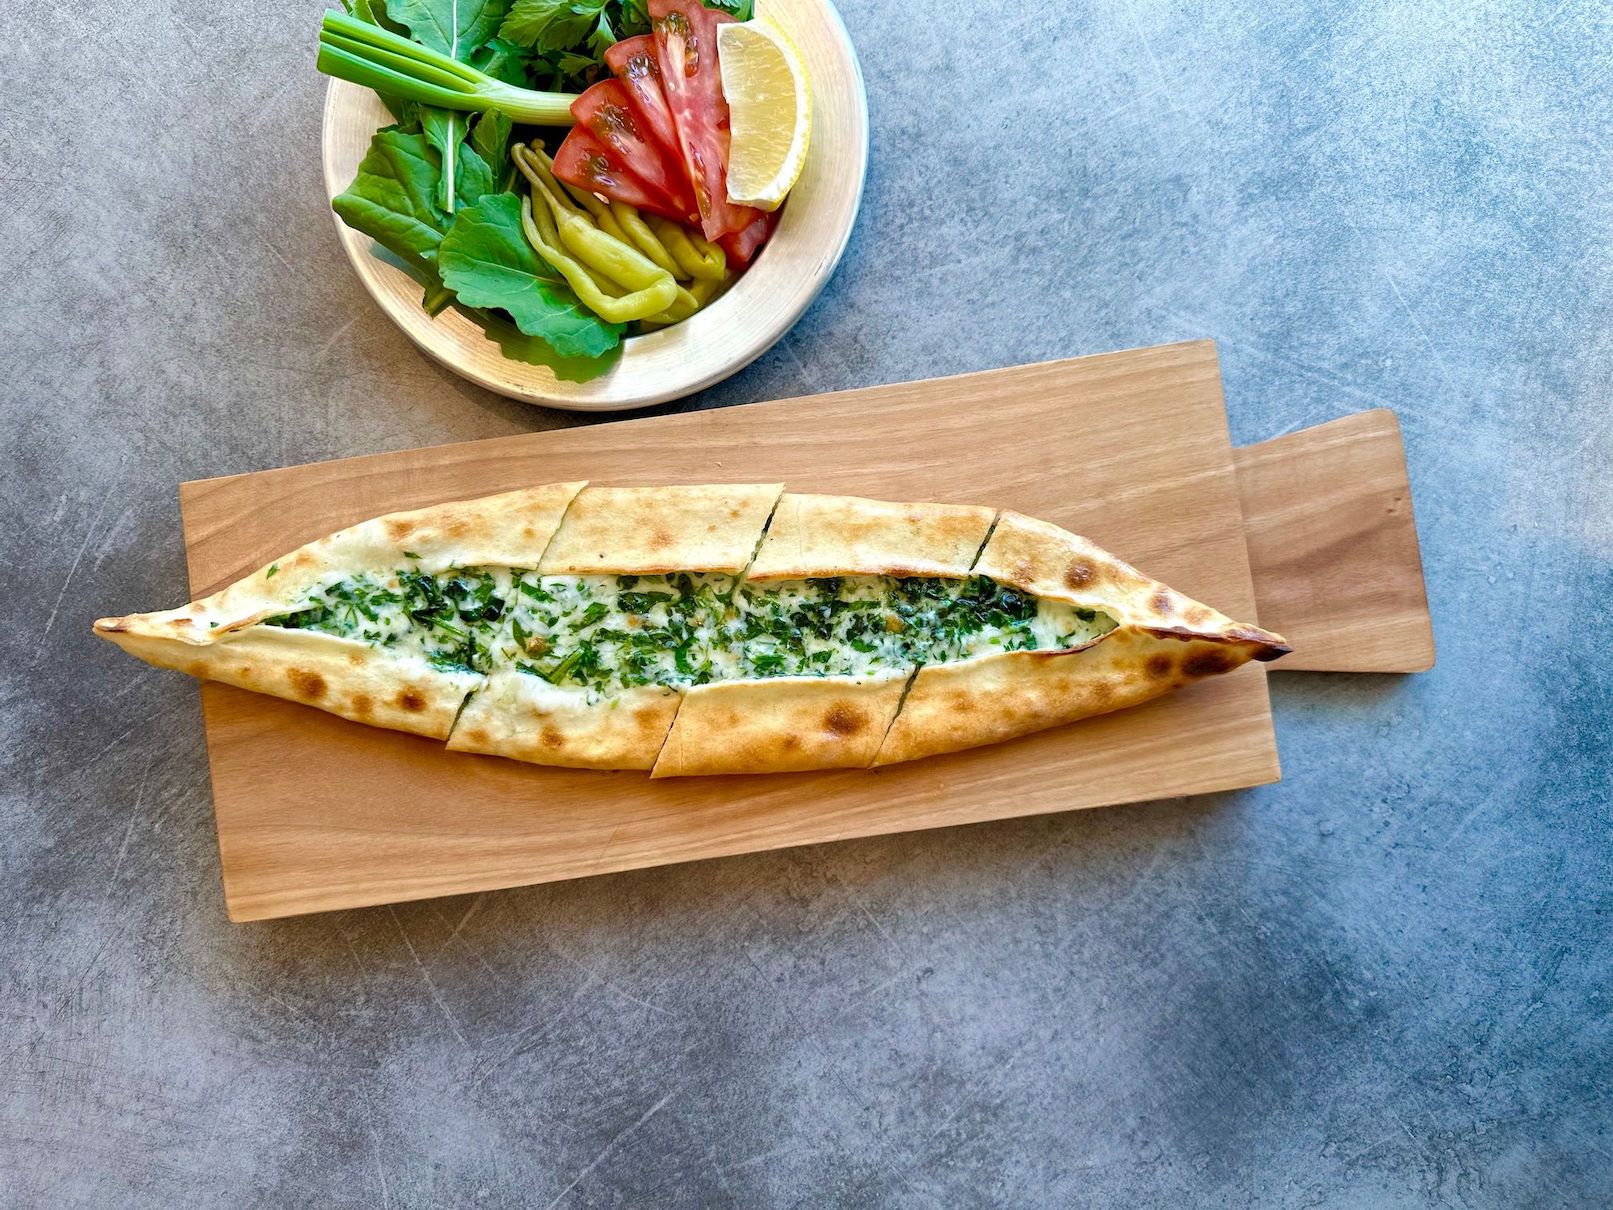 Large bread and spinach dish on a wooden board with veggies on the side